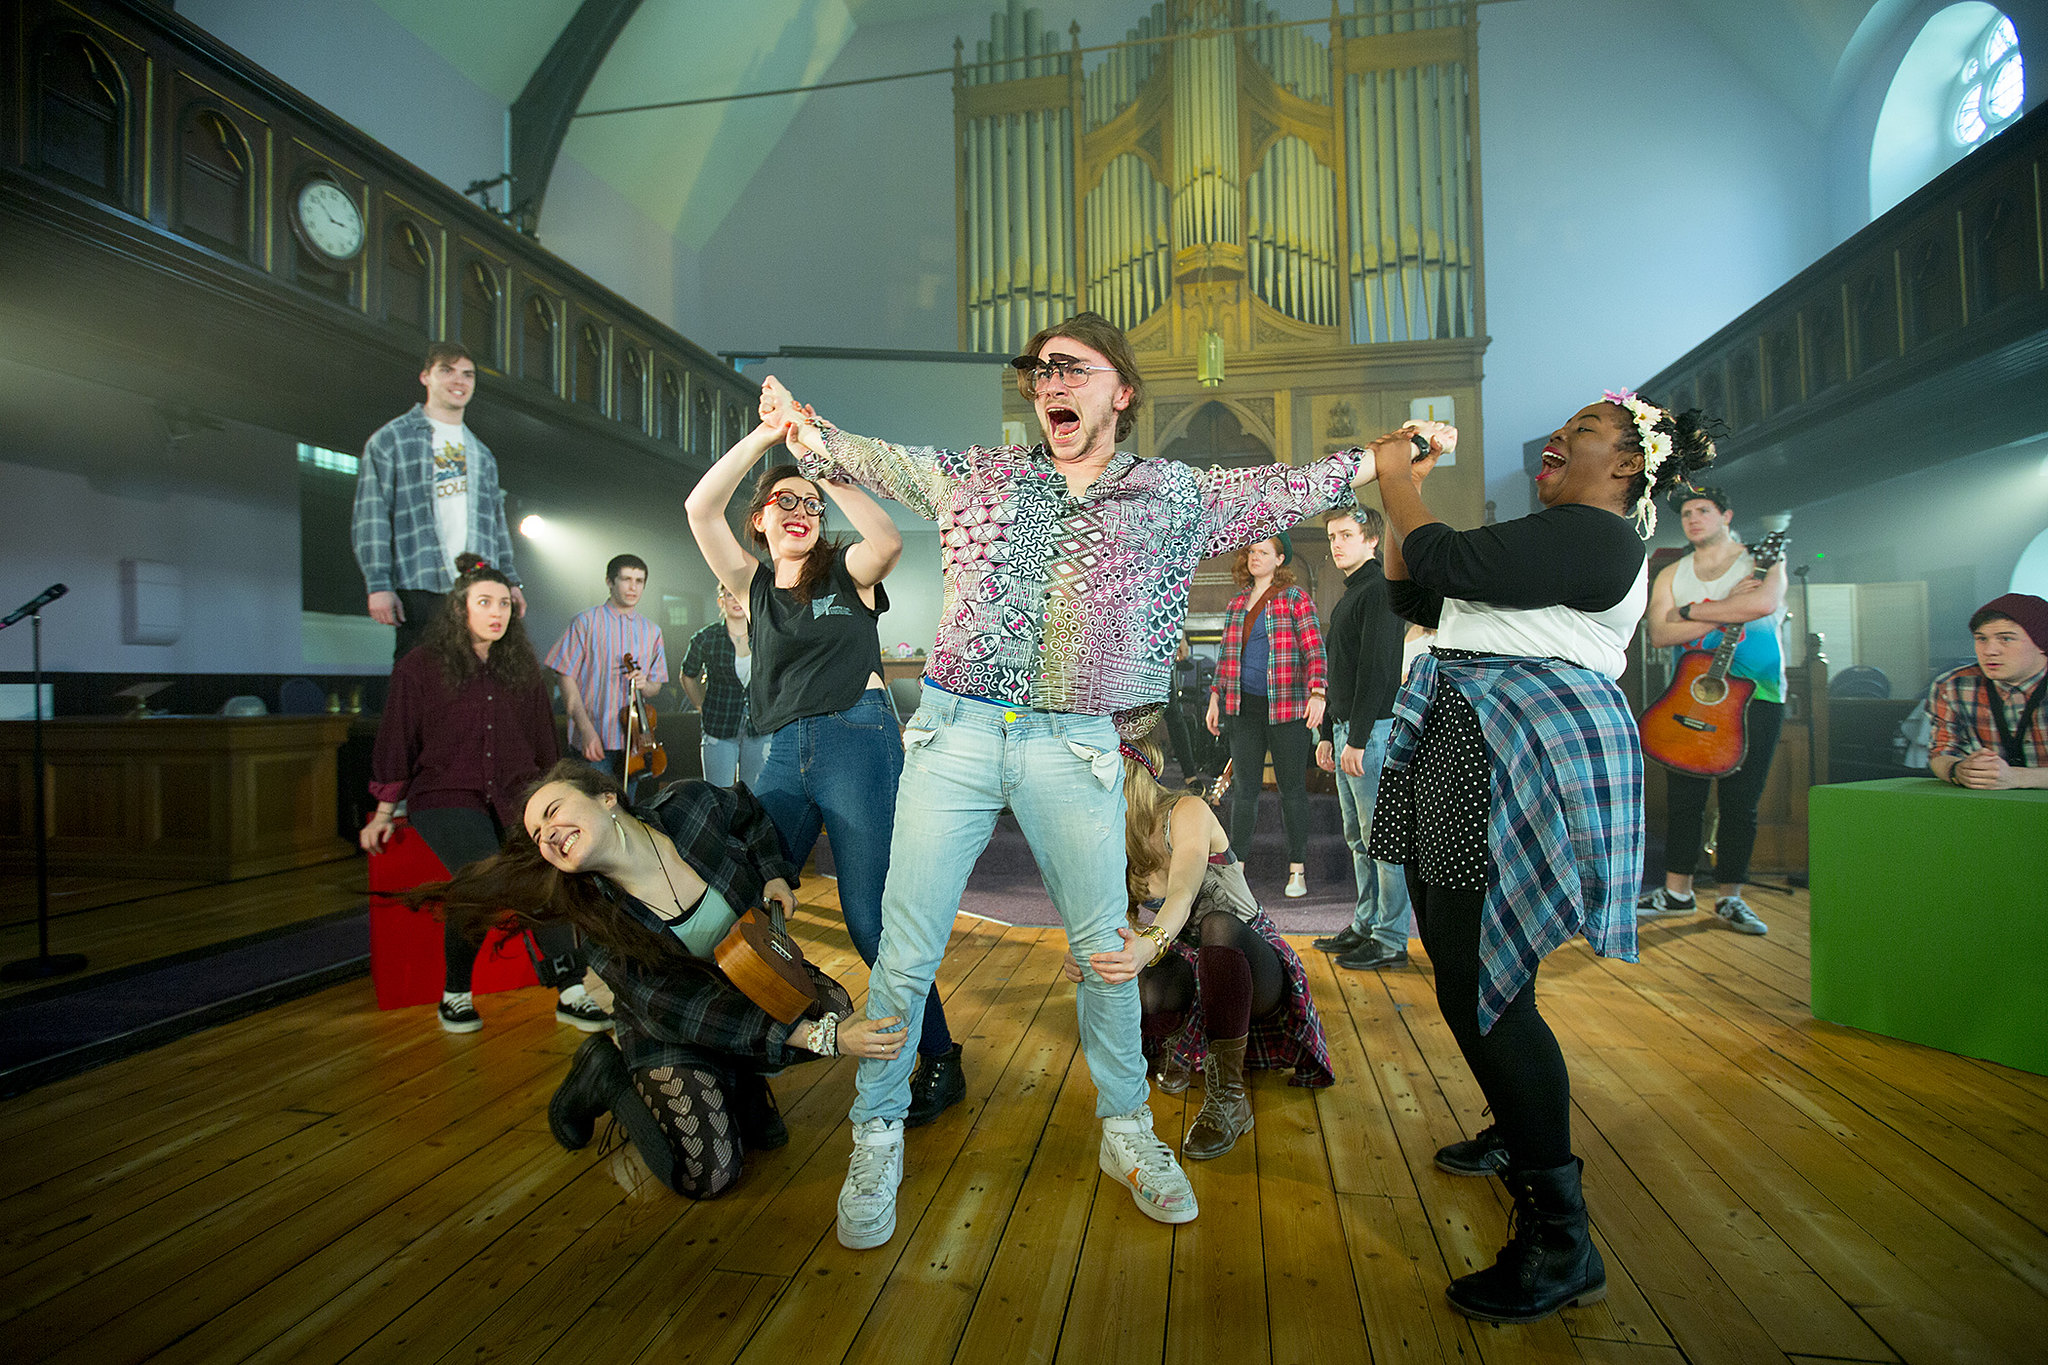 Group of musical theatre performers singing in a church hall